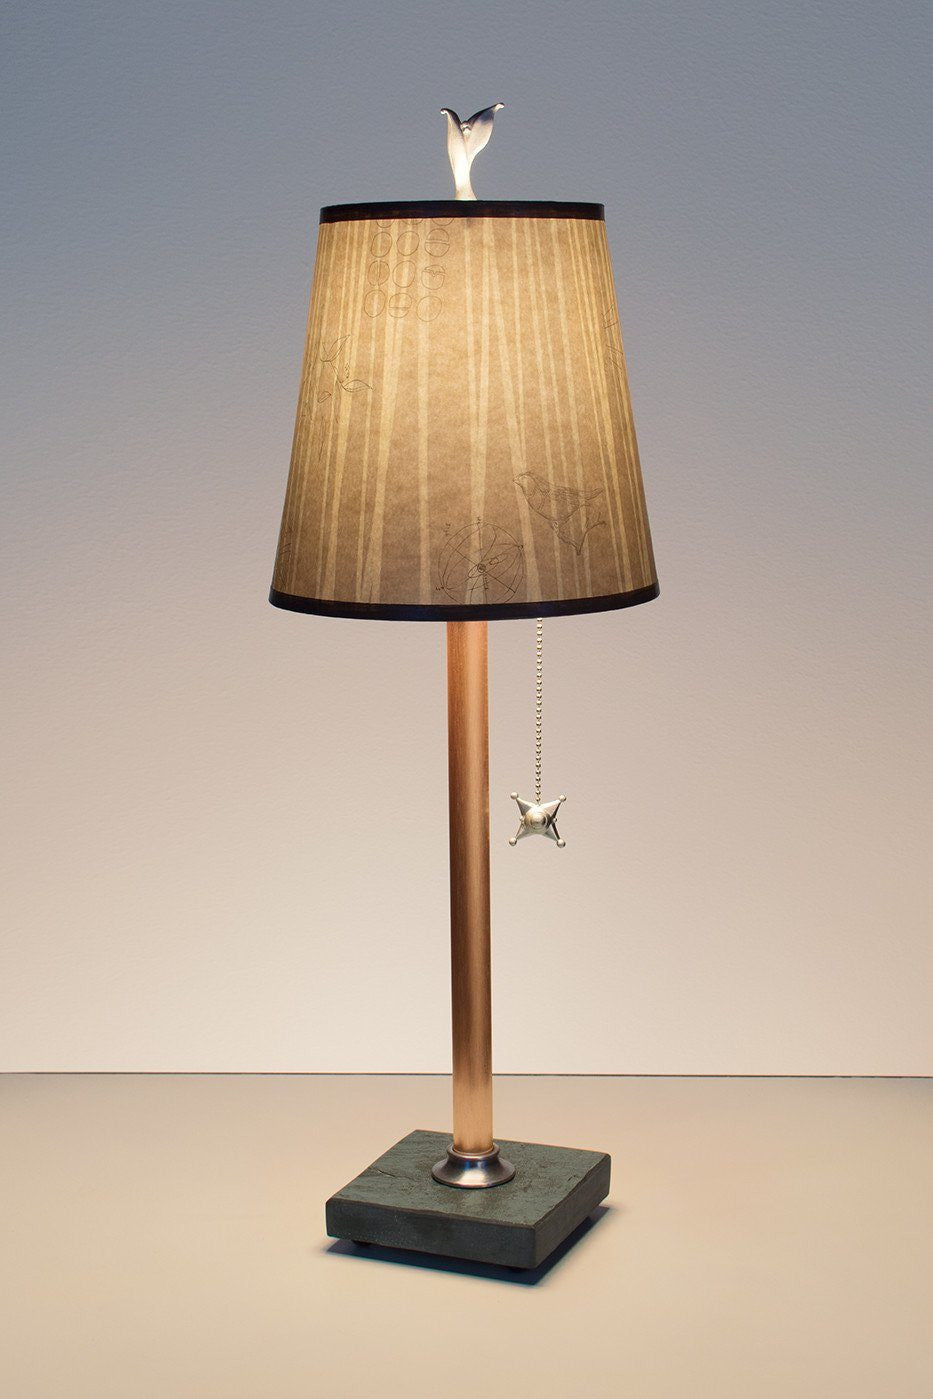 Janna Ugone &amp; Co Table Lamps Copper Table Lamp with Small Drum Shade in Birch Lines